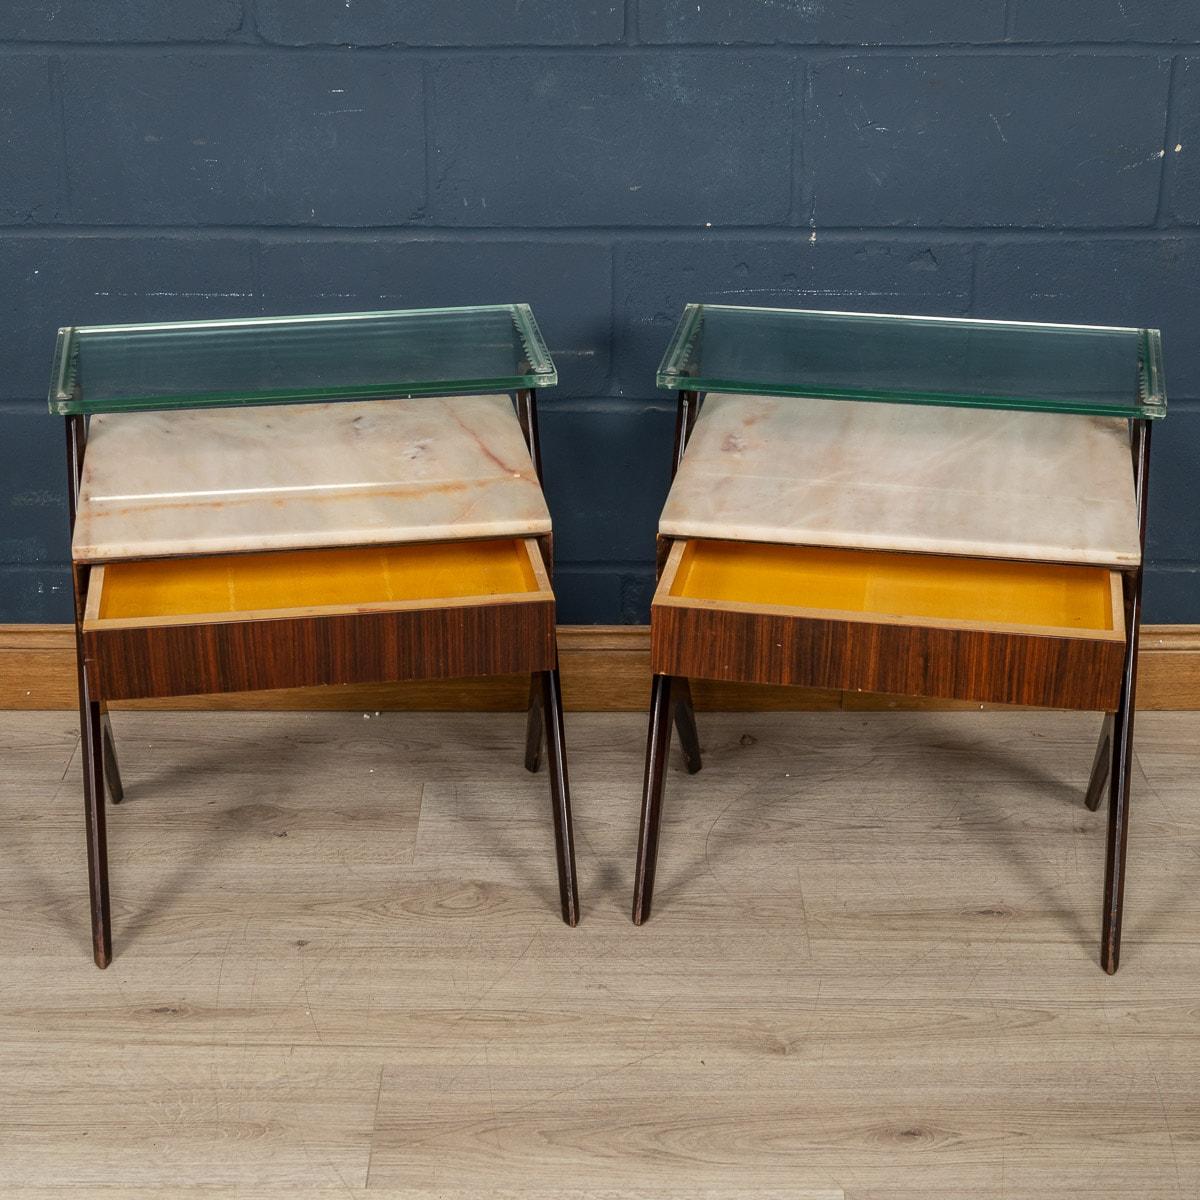 A Pair Of Italian Rosewood Side Tables By Vittorio Dassi, c.1950 In Good Condition For Sale In Royal Tunbridge Wells, Kent